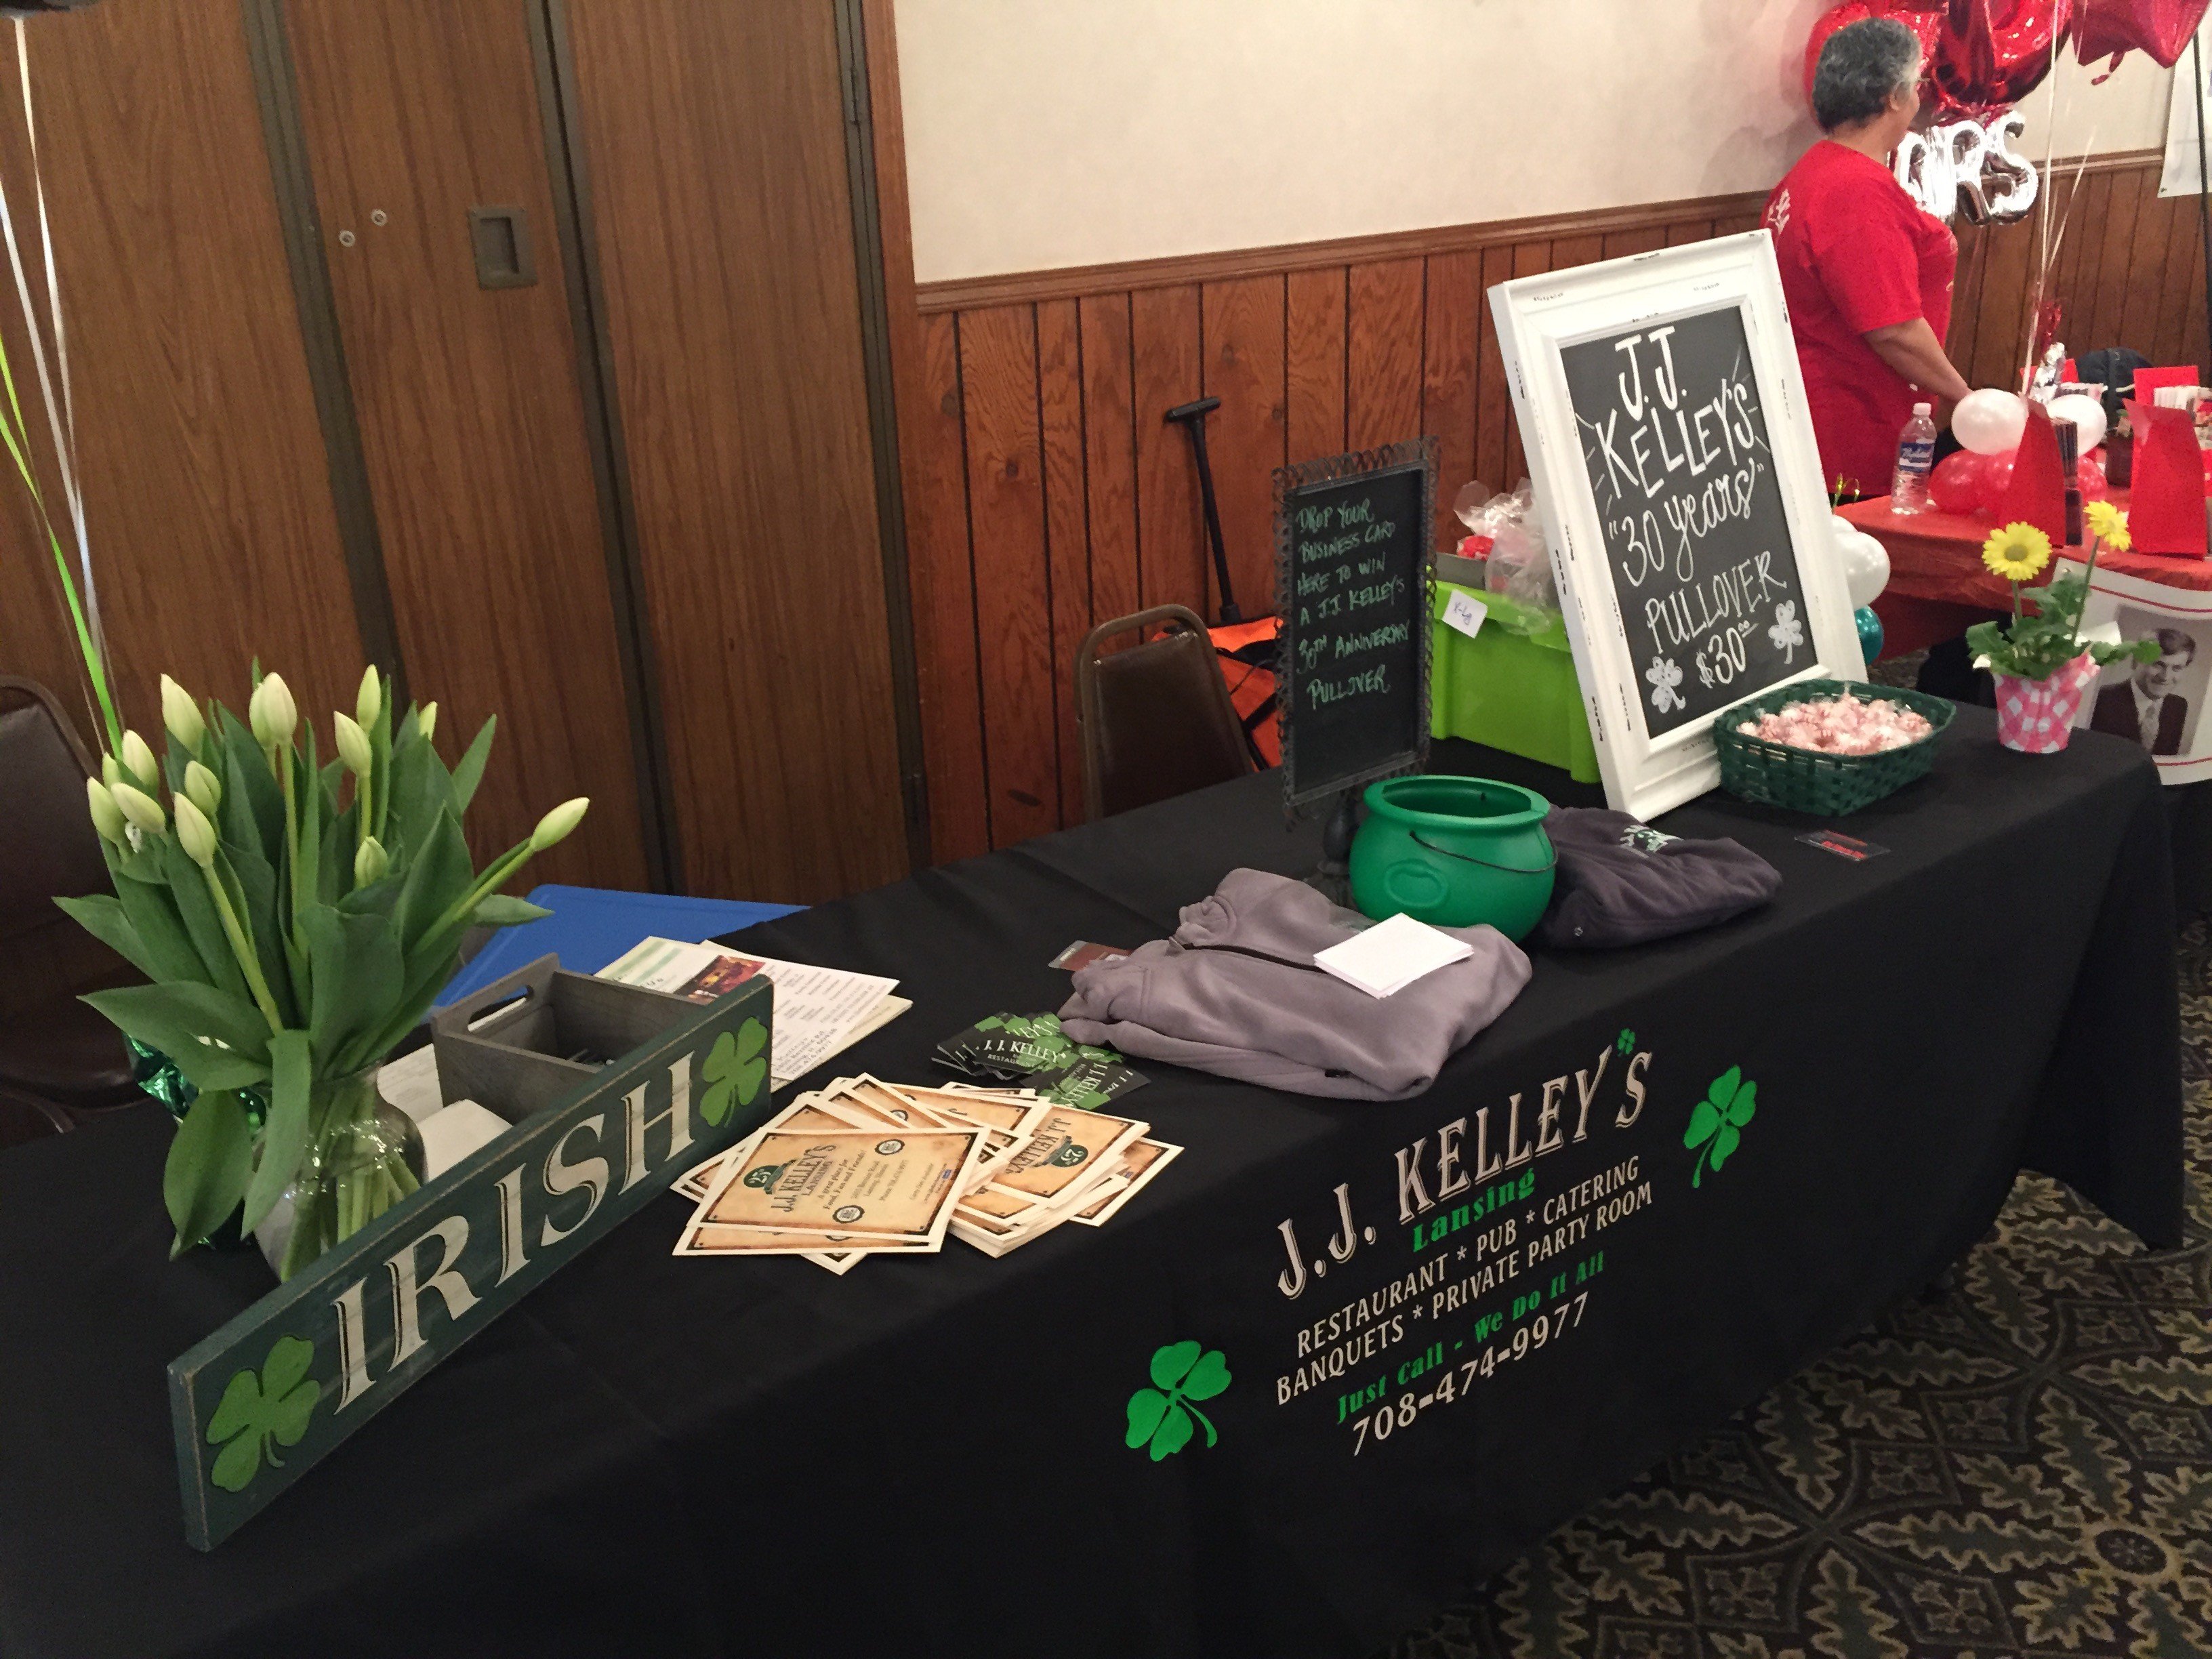 JJ Kelly's Booth at the Lansing Chamber of Commerce 2018 Business Expo (Photo: Matthew J. Splant)